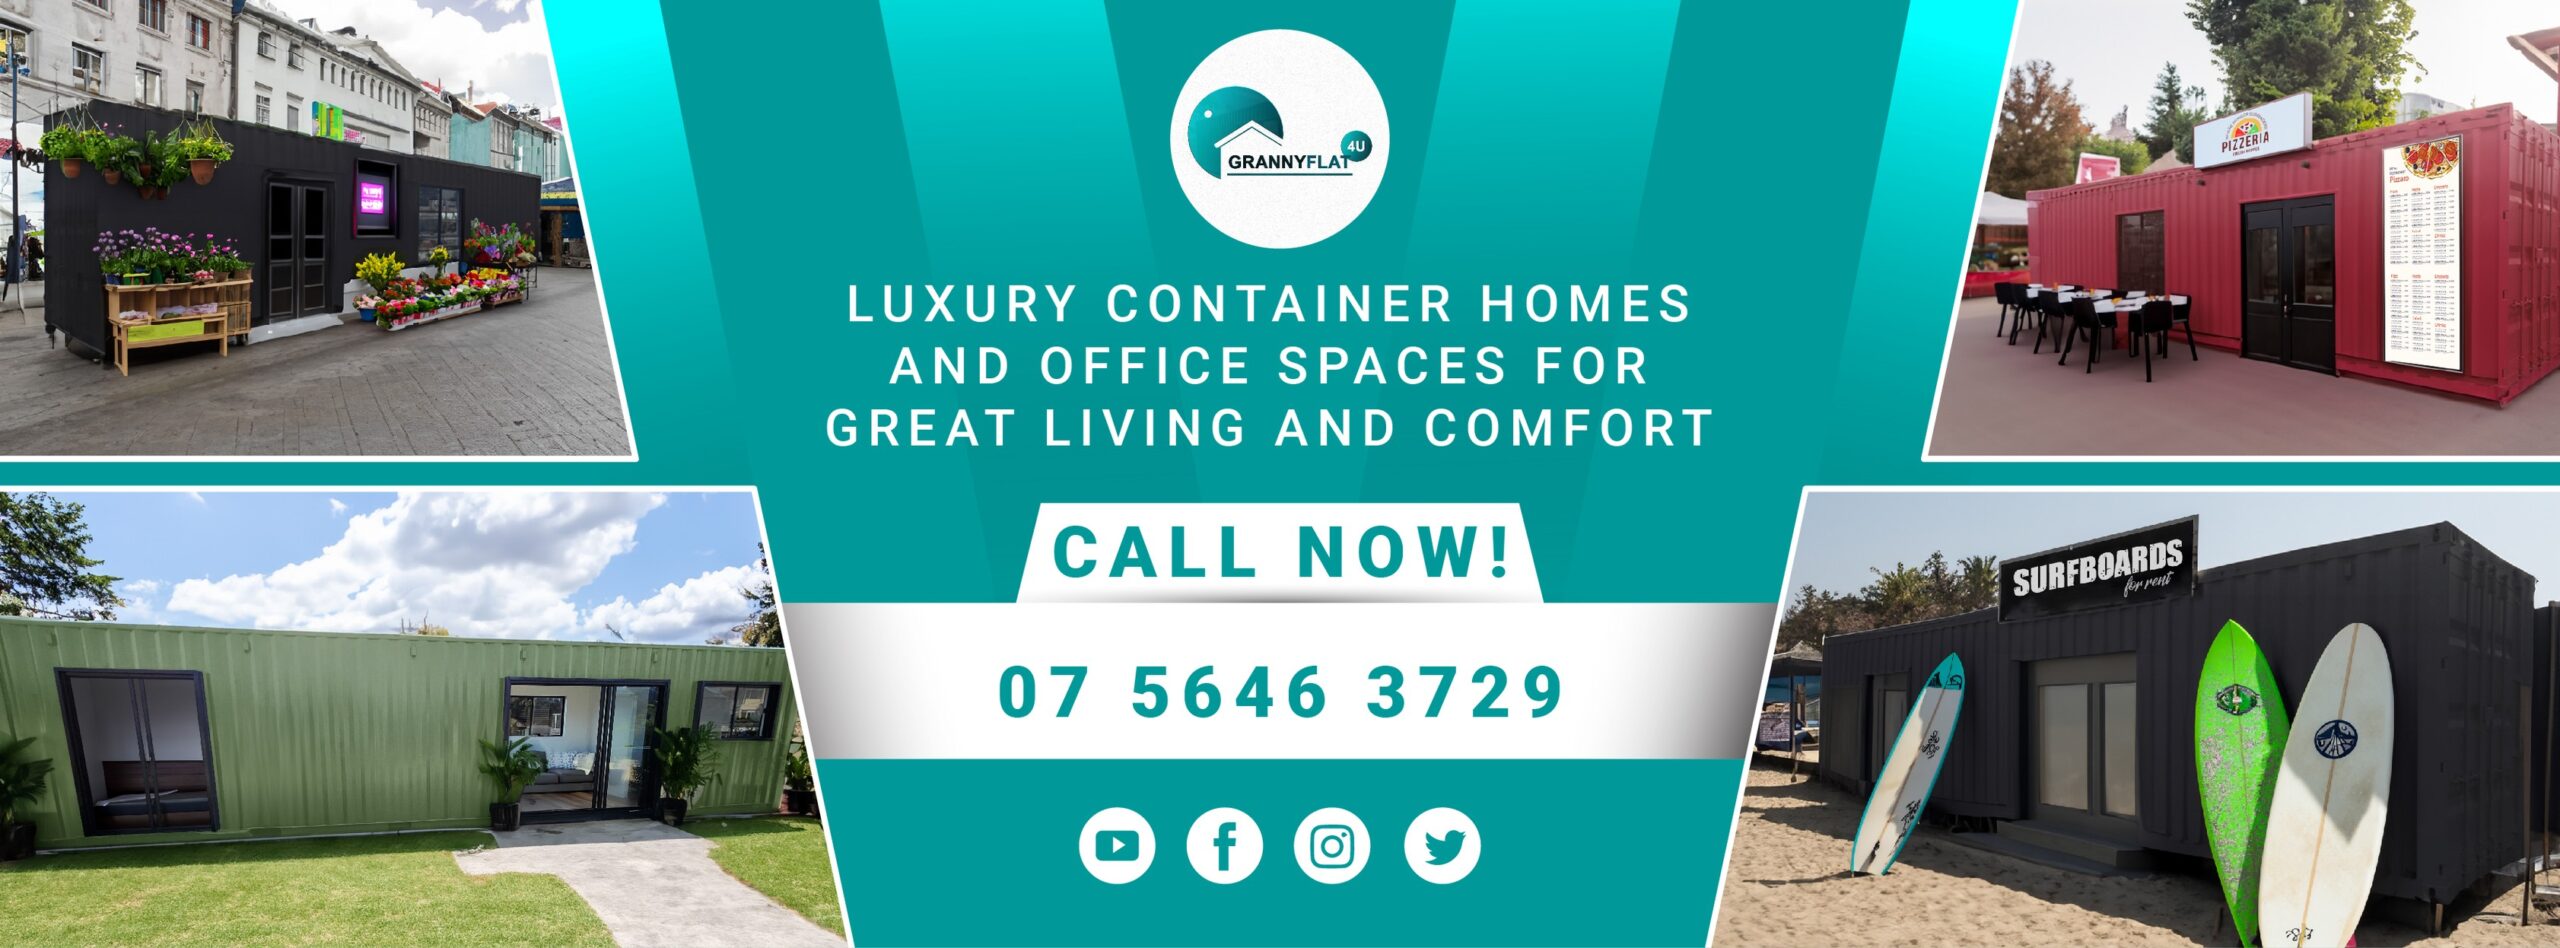 Continer homes_shipping container homes_logo